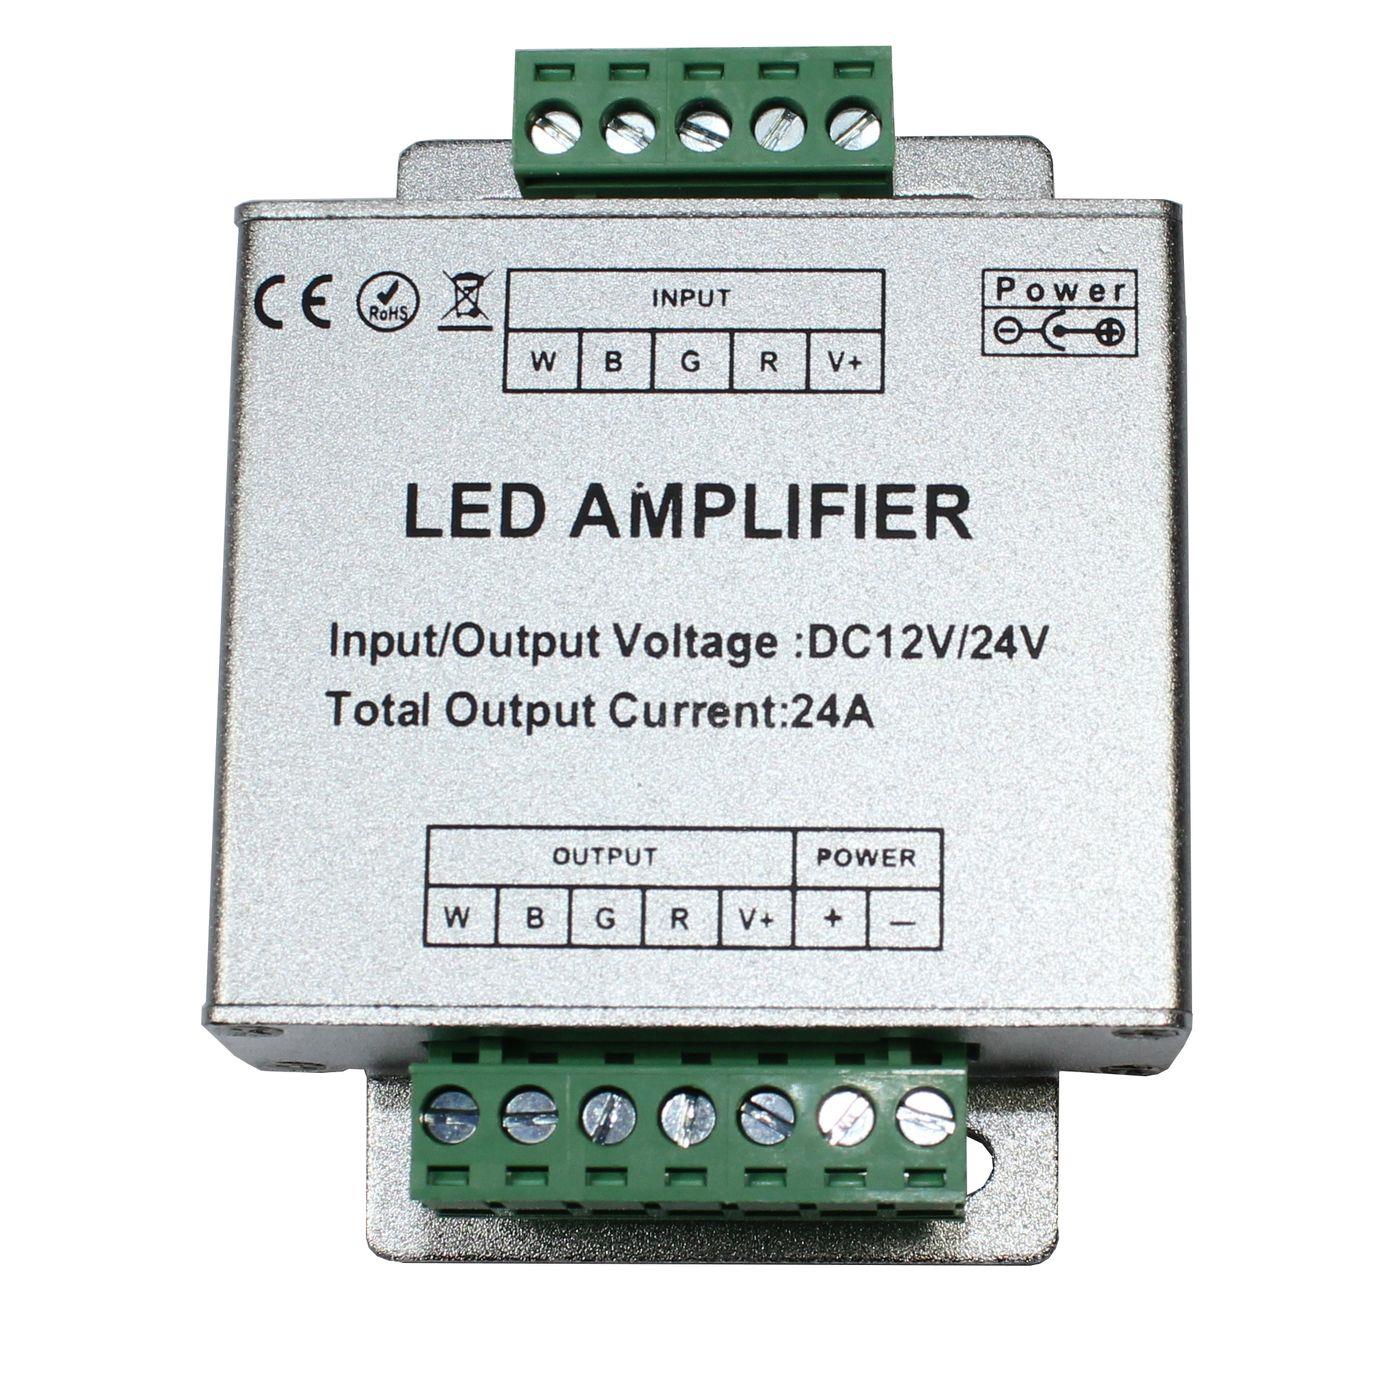 RGBW LED Signal amplifier 12...24V 576W for colour changing strips 5-Pin